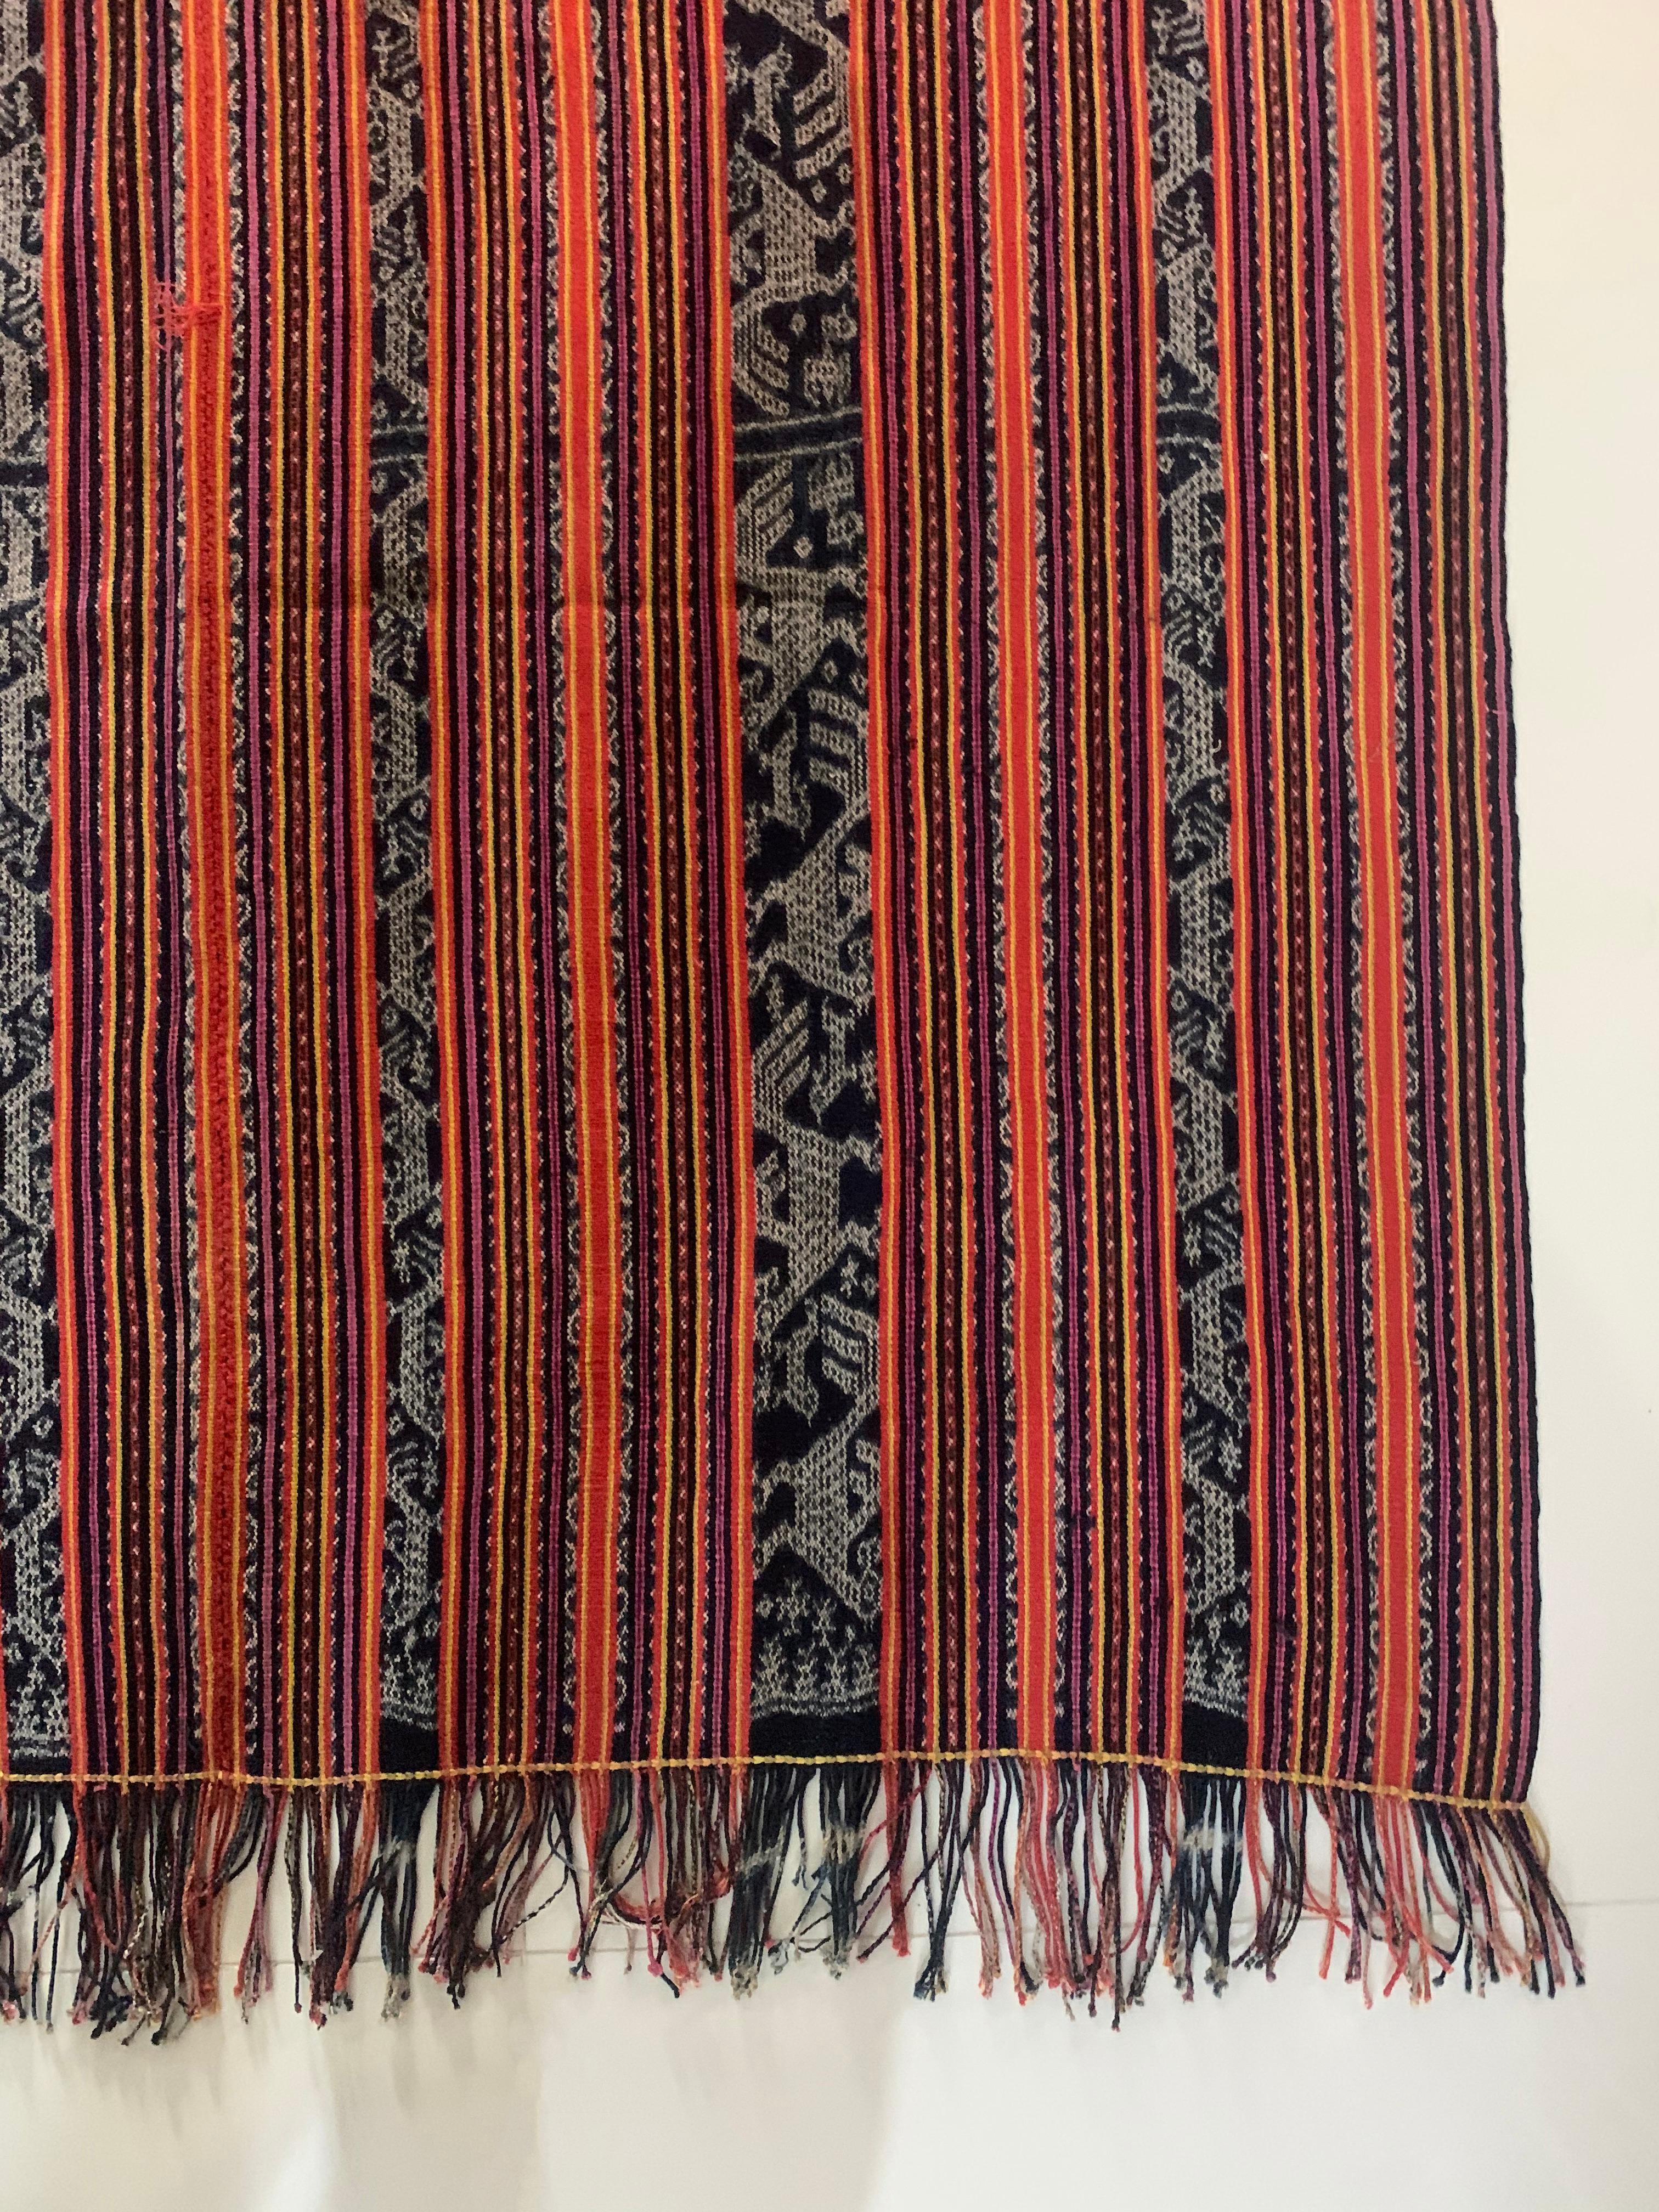 Other Ikat Textile from Timor with Stunning Tribal Motifs & Colours, Indonesia